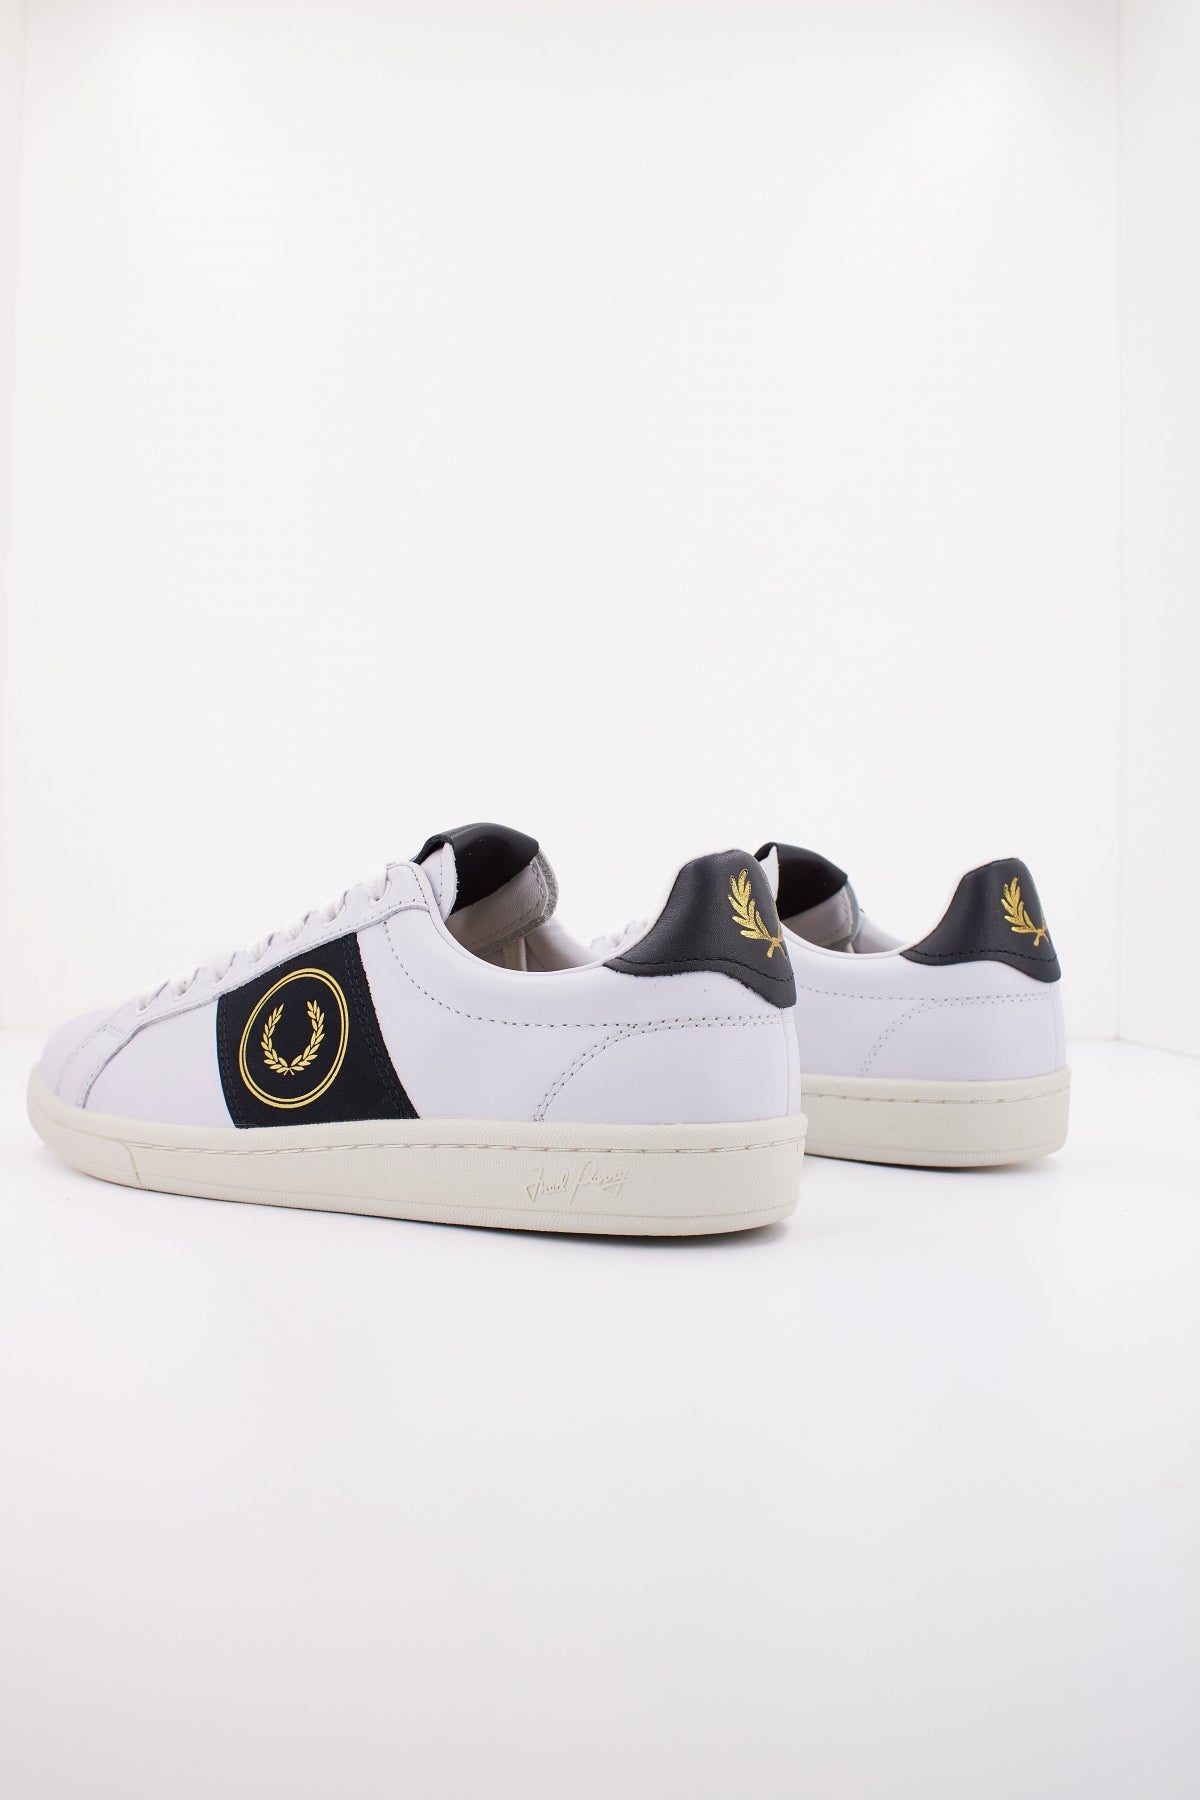 FRED PERRY B LEATHER/BRANDE en color BLANCO  (3)